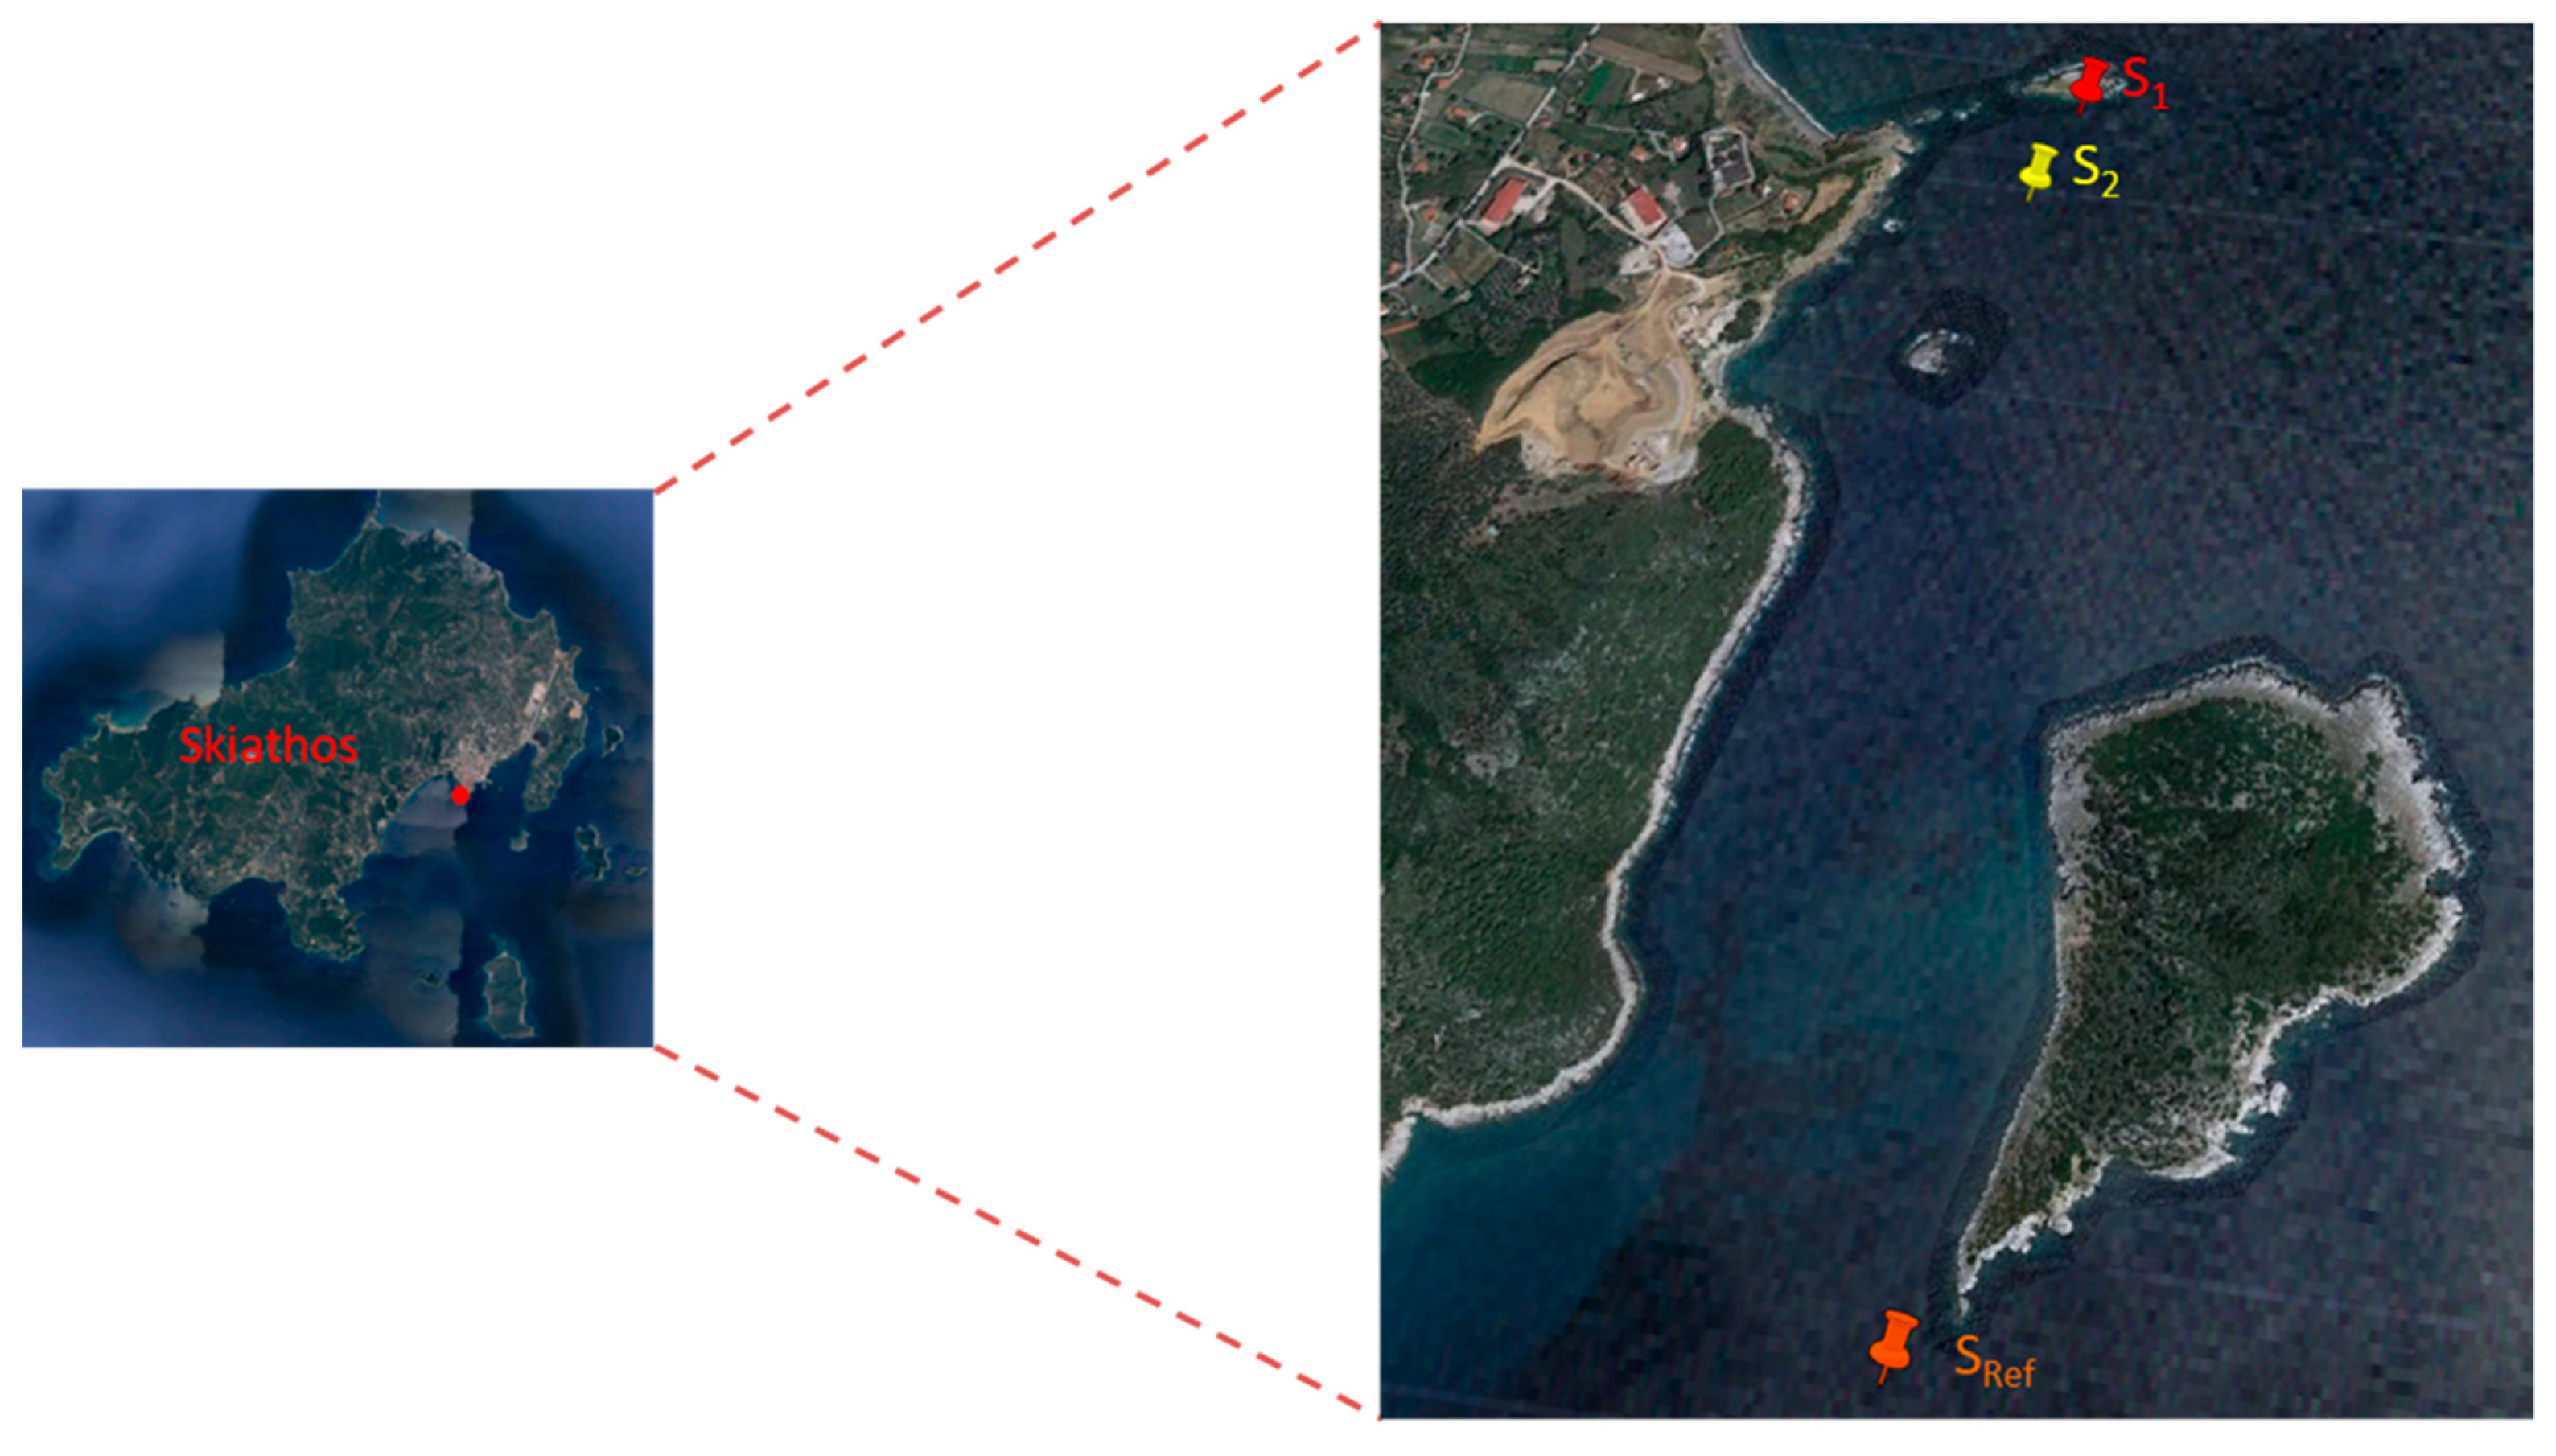 Environmental Sciences Proceedings | Free Full-Text | The Impact of  Possible Mercury Source-Point Contamination in the Coastal Area of Skiathos  Island | HTML